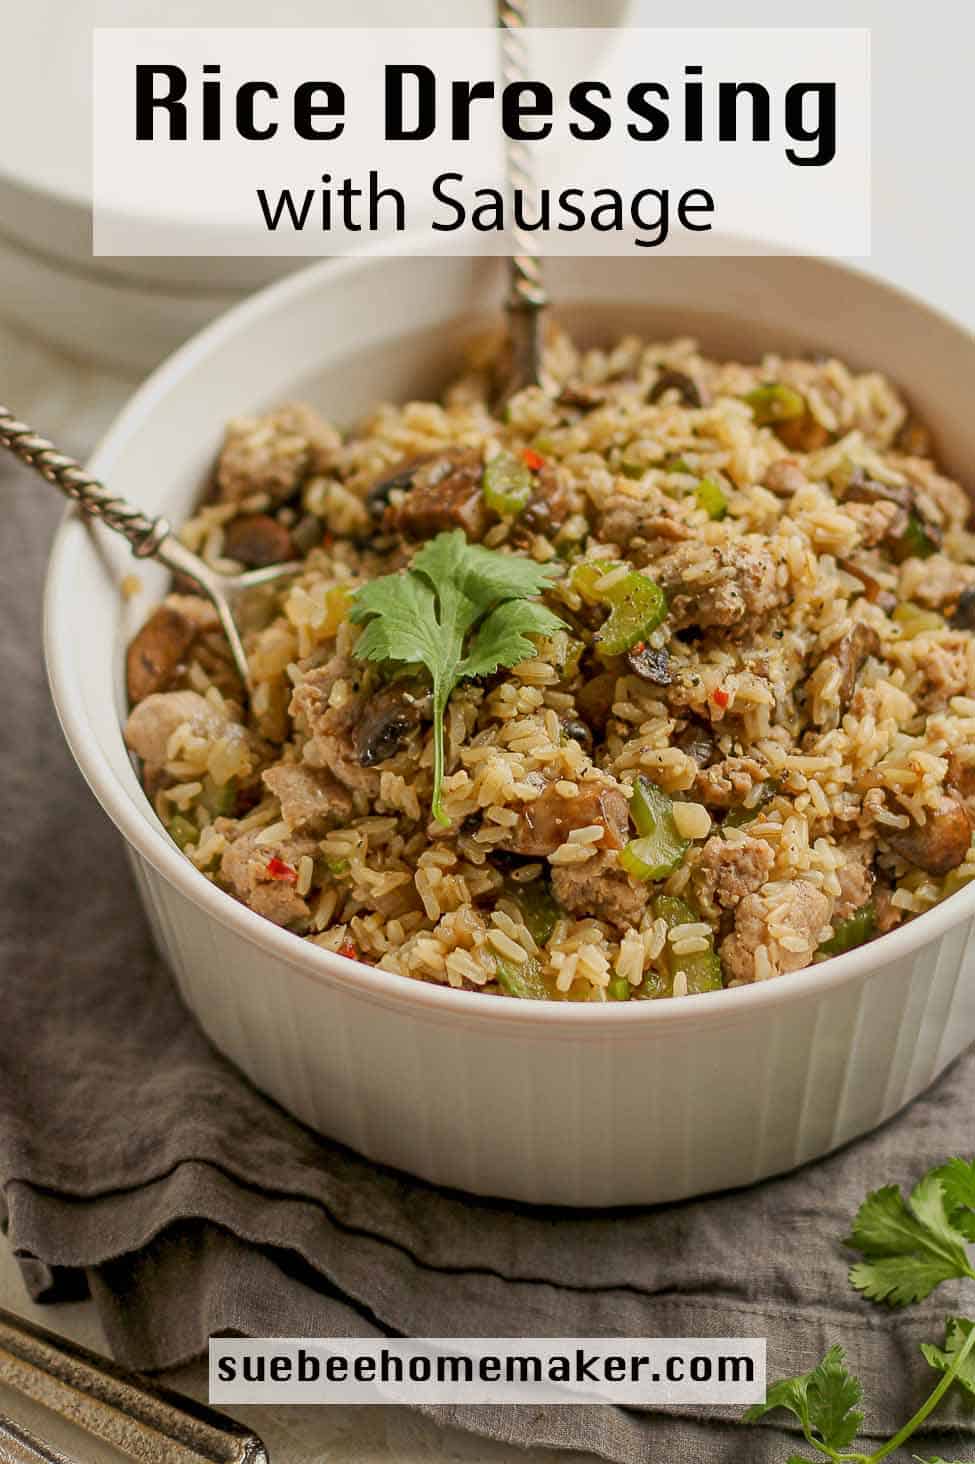 A large dish of rice dressing with sausage and mushrooms.